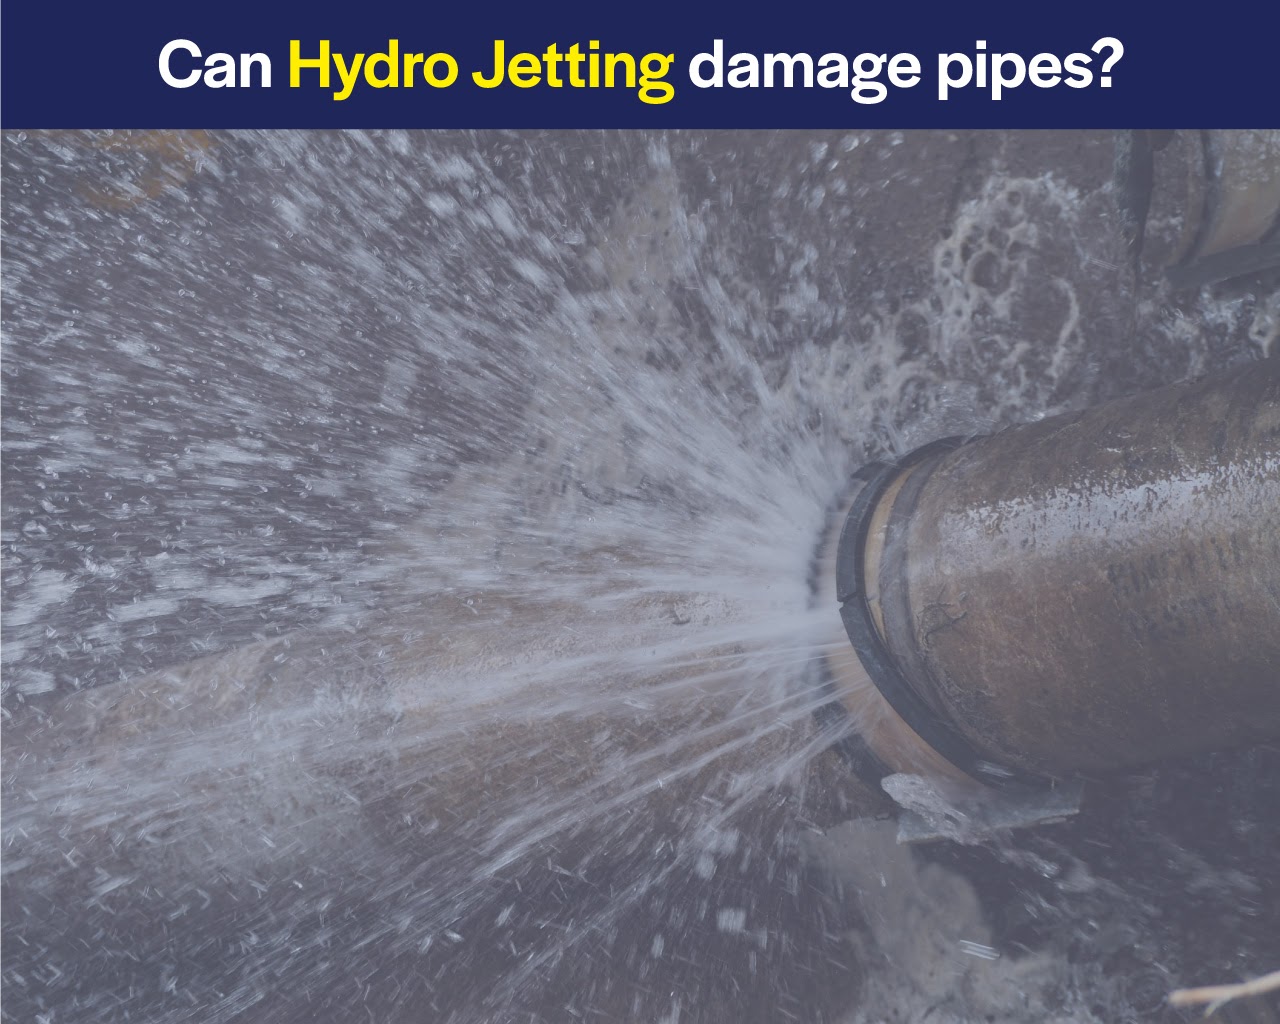 Hydro Jetting Damage Pipes